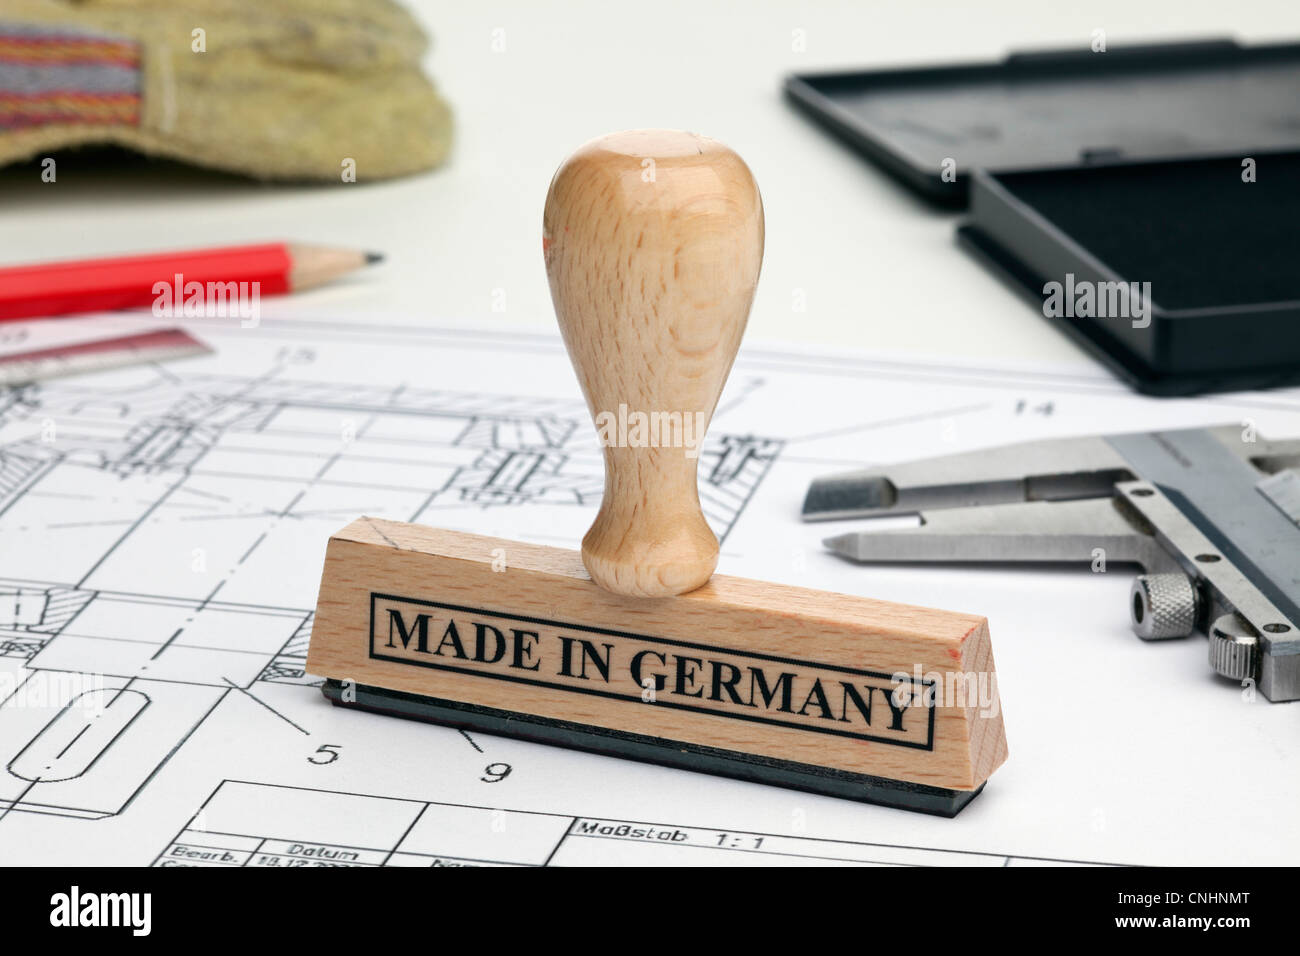 A MADE IN GERMANY rubber stamp on a blueprint Stock Photo